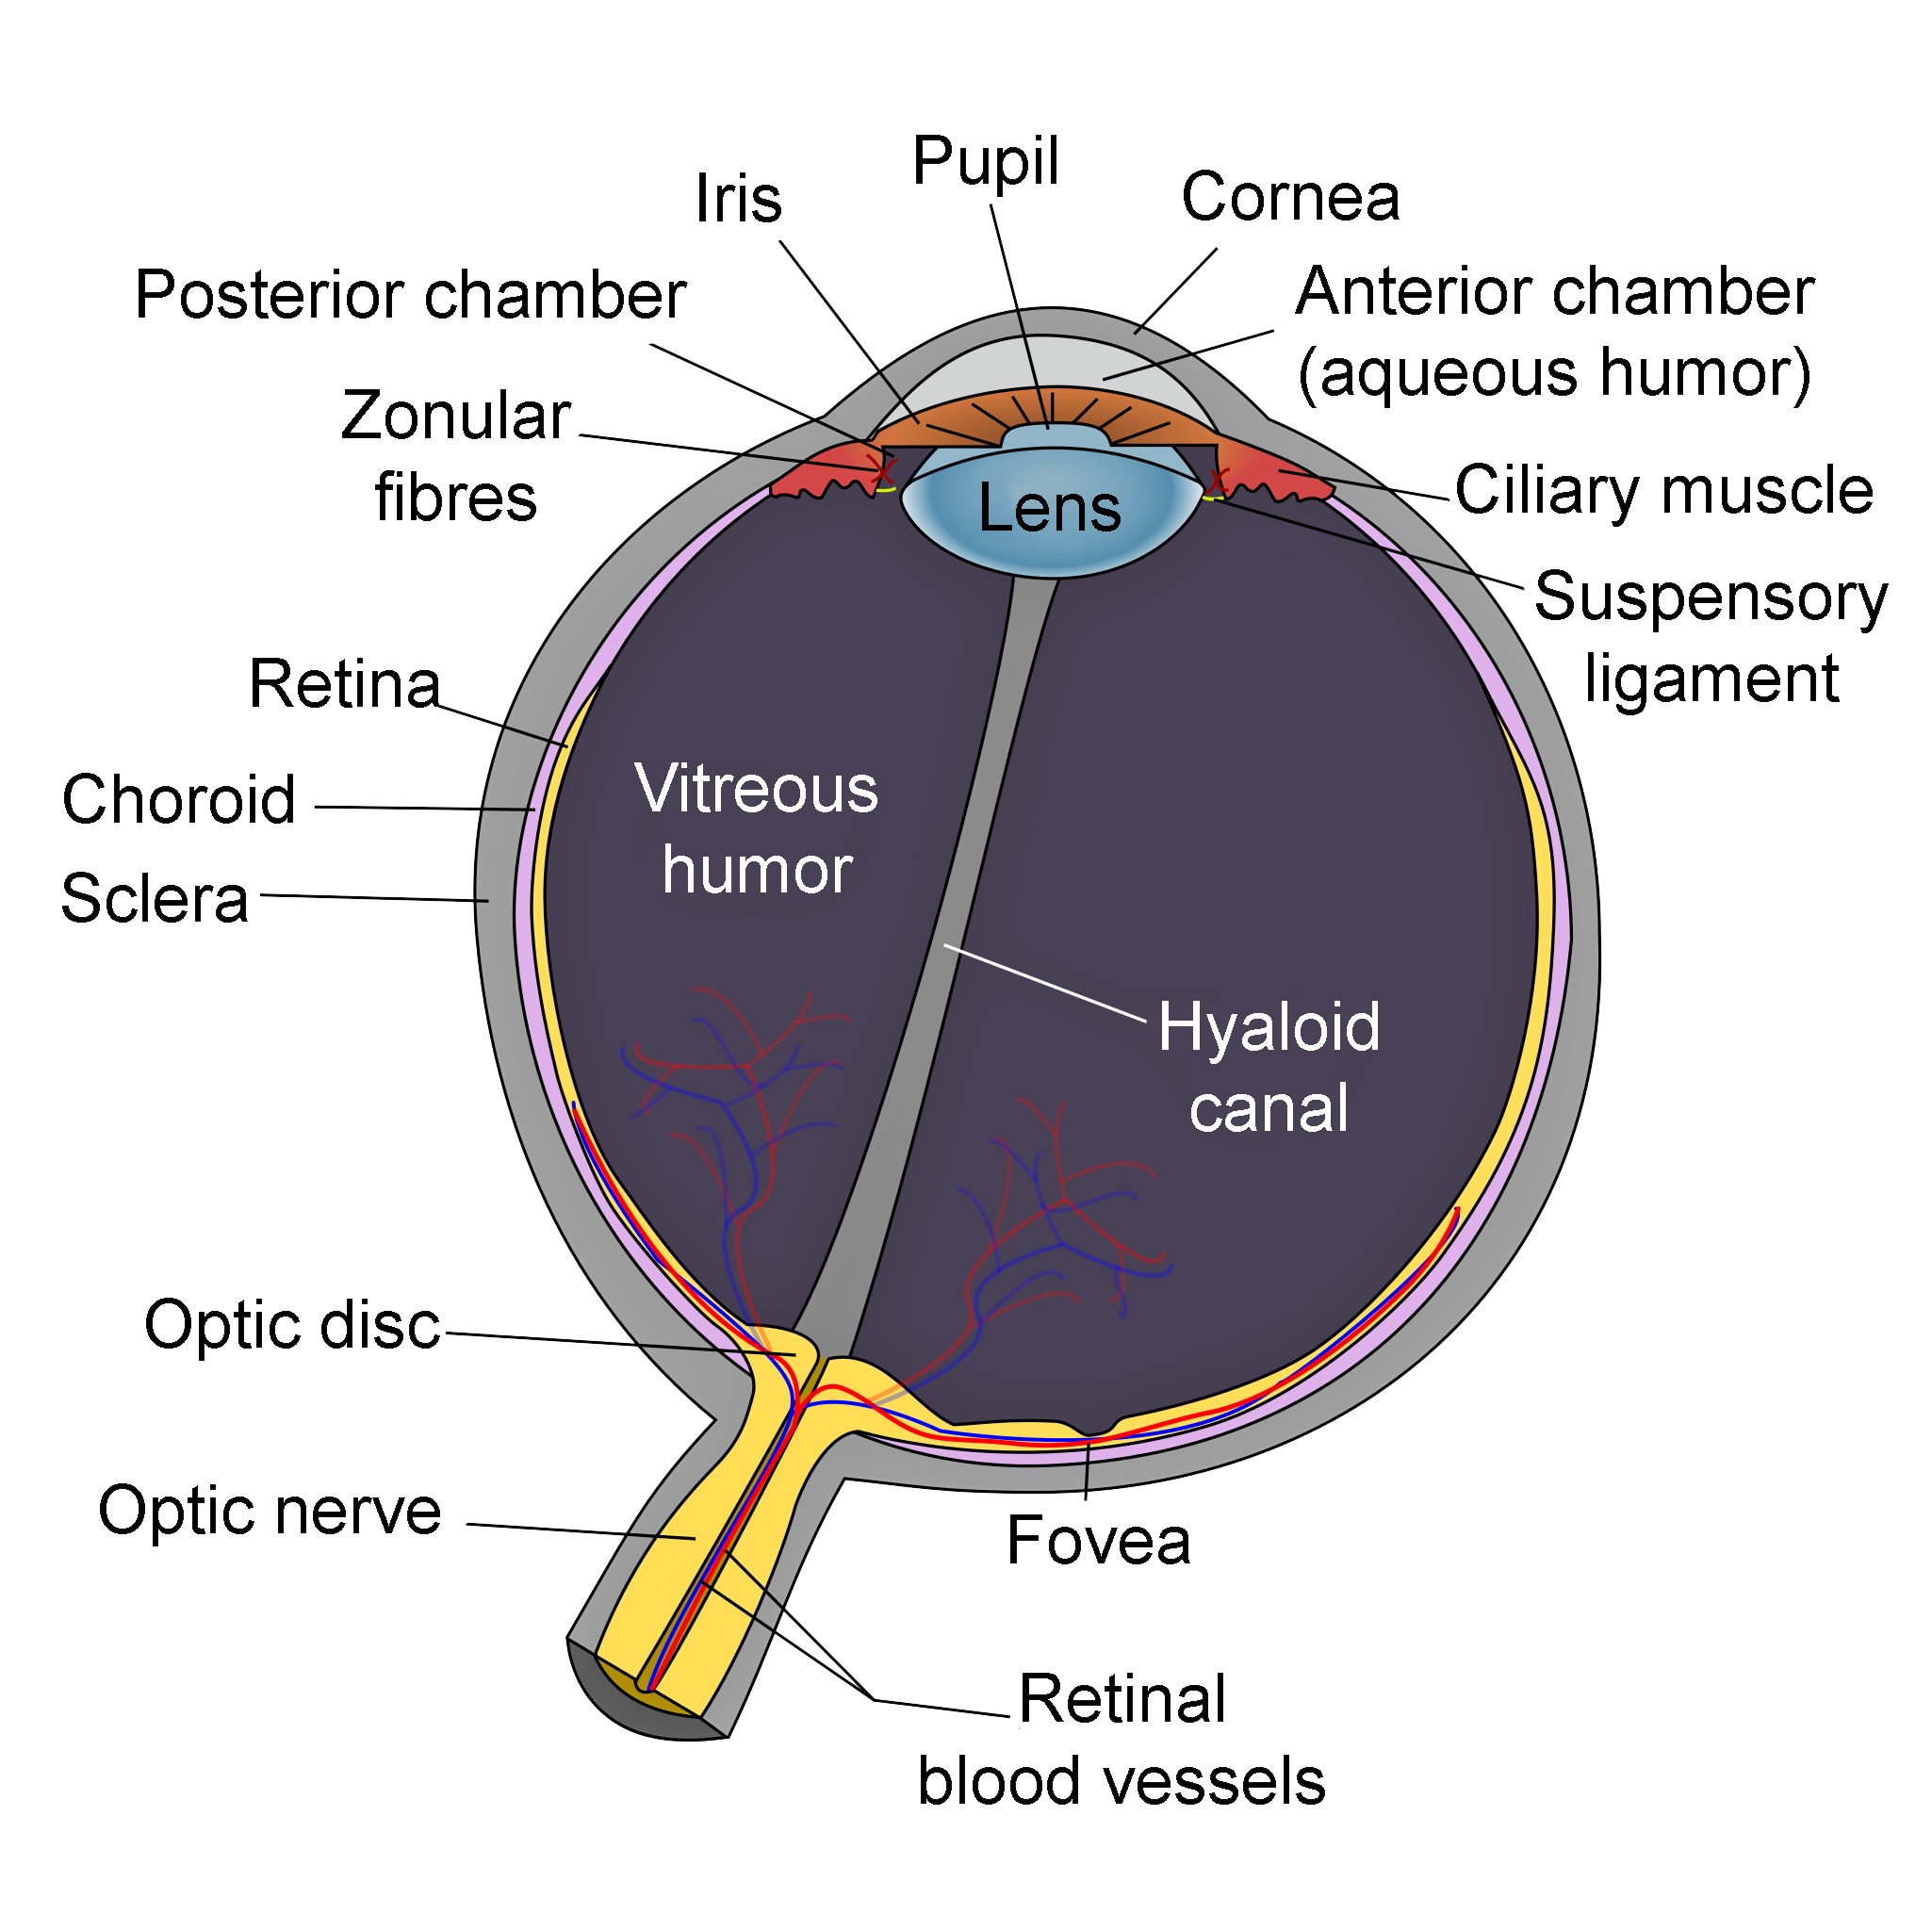 Schematic of eye anatomy including the optic disc, optic nerve, fovea, sclera, choroid, vitreous humor, hyaloid canal, retina, zonular fibers, iris, pupil, cornea, ciliary muscle, and suspensory ligament